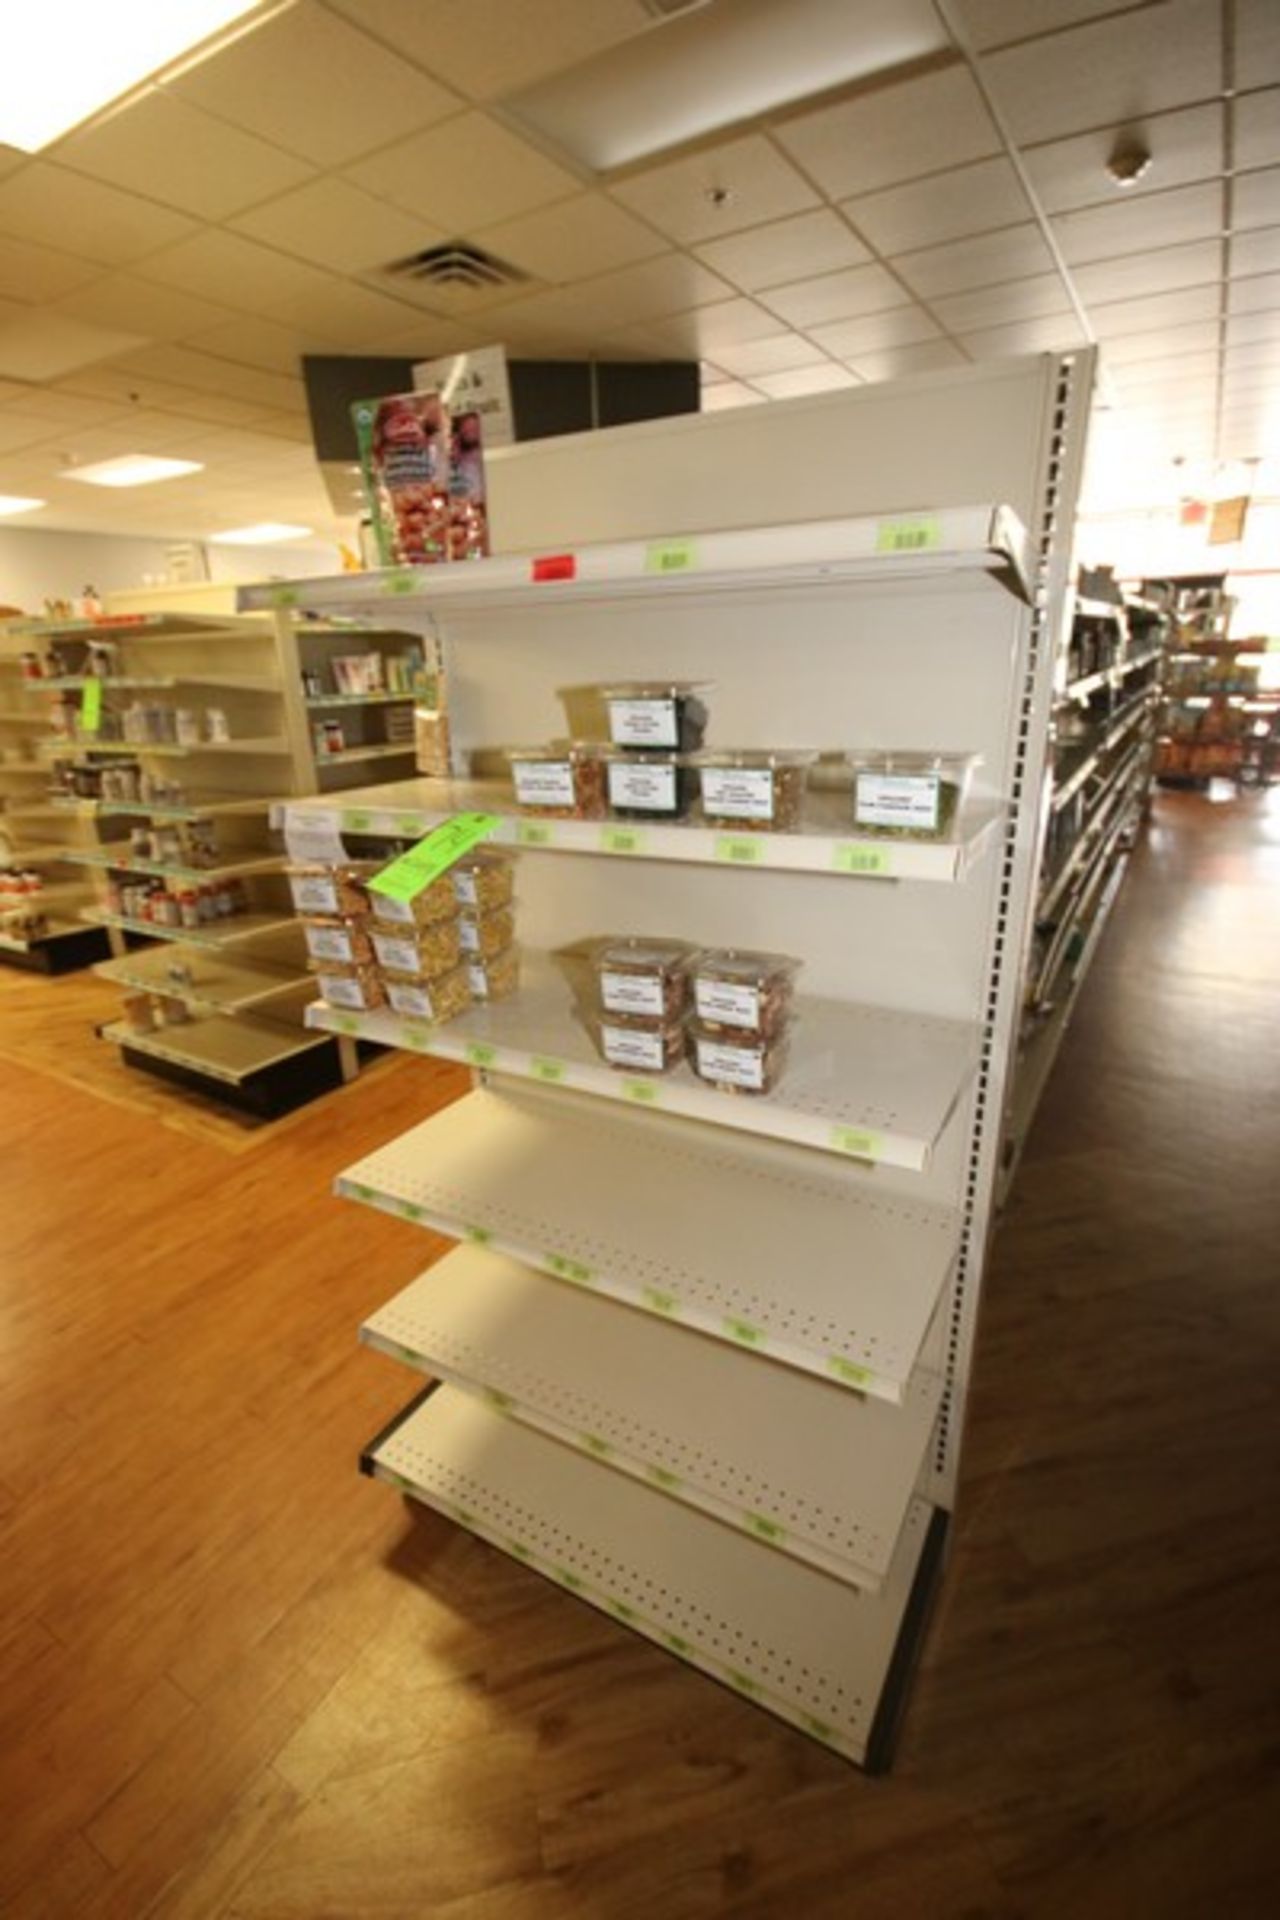 End Shelf, with 6-Shelf Design, Overall Dims.: Aprox. 36" L x 18" W x 72" H (Located in McMurray, - Image 2 of 2